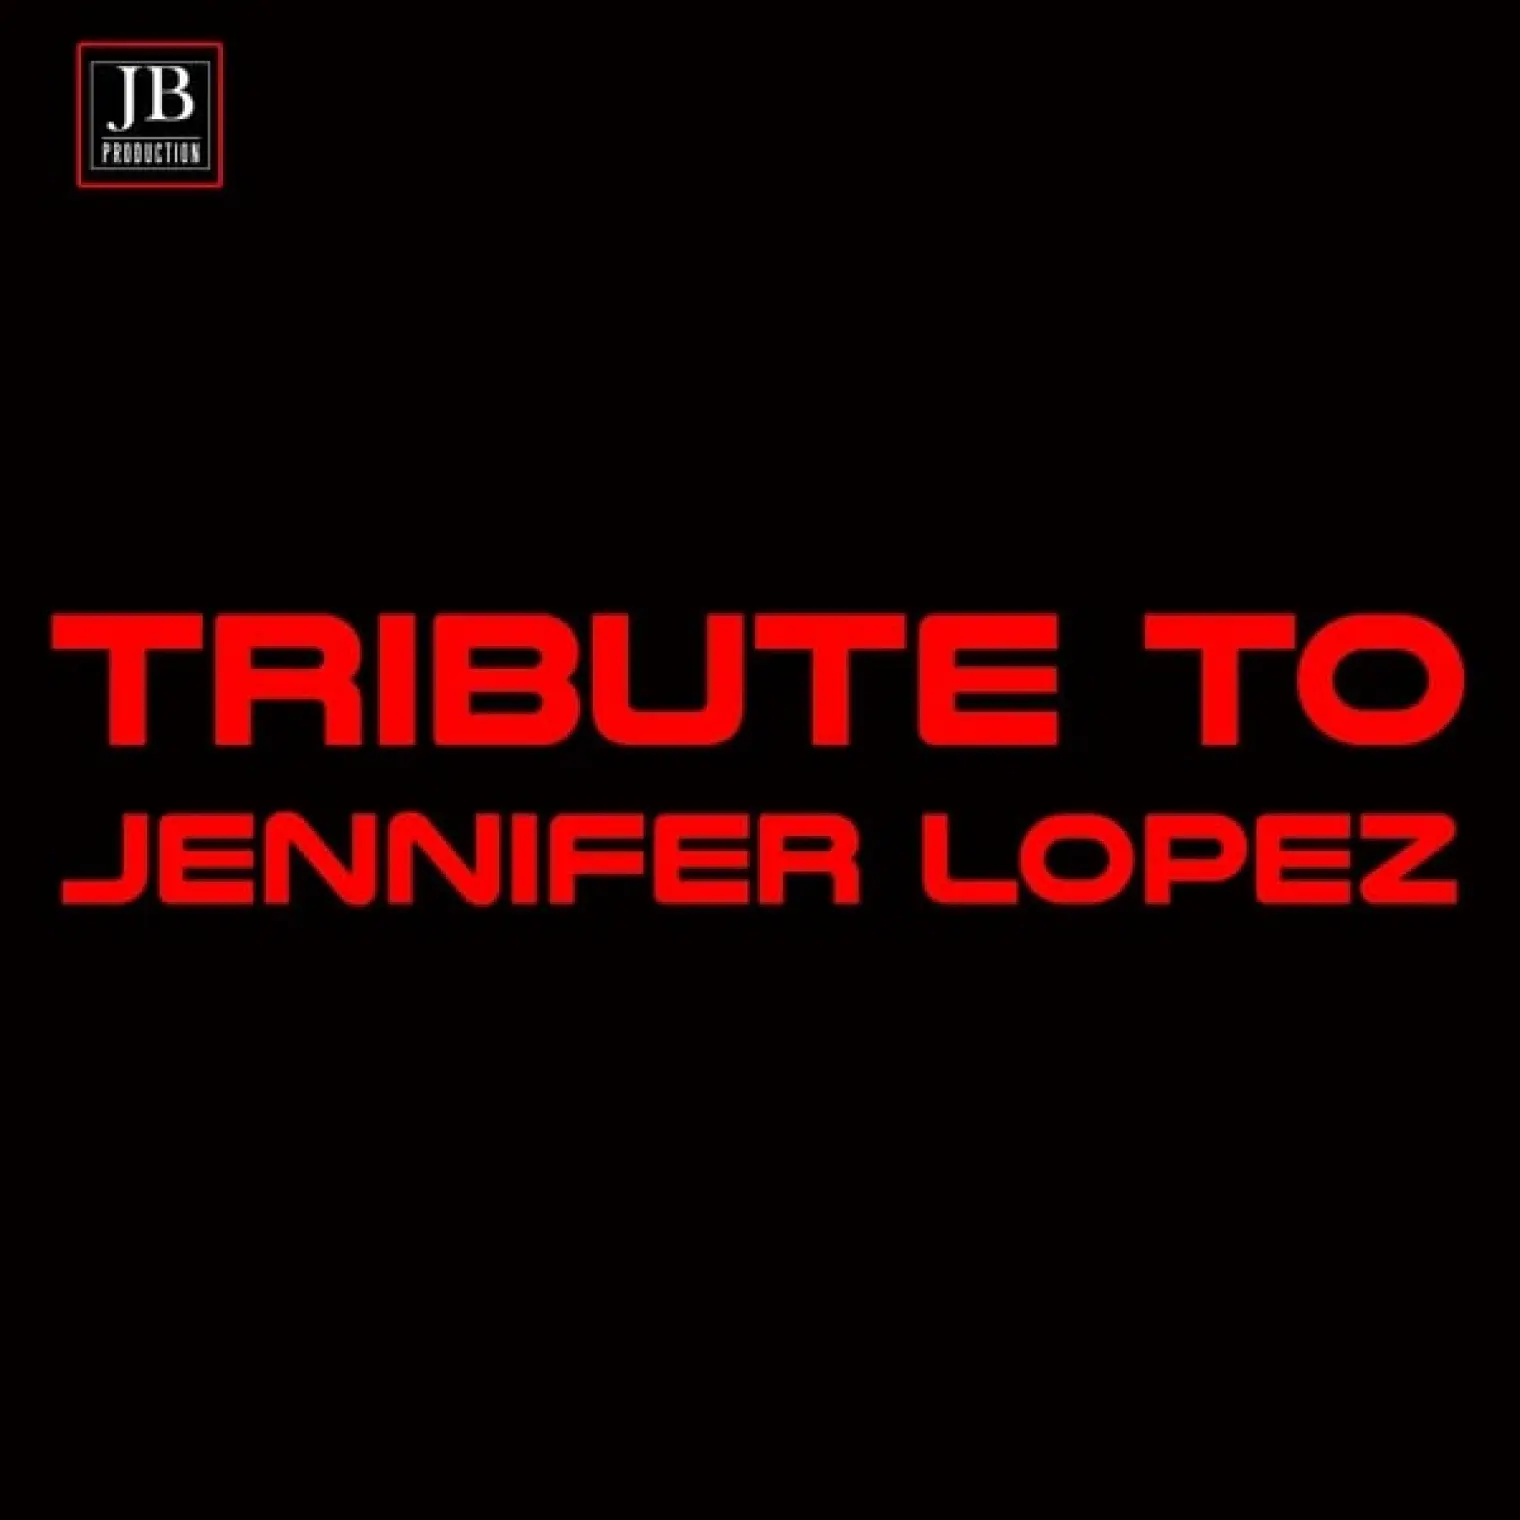 Jennifer Lopez Medley: Waiting for Tonight / No Me Ames / If You Had My Love / Love Don't Cost a Thing / Feelin' So Good / Play /I'm Real / Dame (Touch Me) / Jenny from the Block / I'm Gonna Be Alright / Alive / Ain't It Funny / I'm Glad / All I Have / Ba -  Silver 